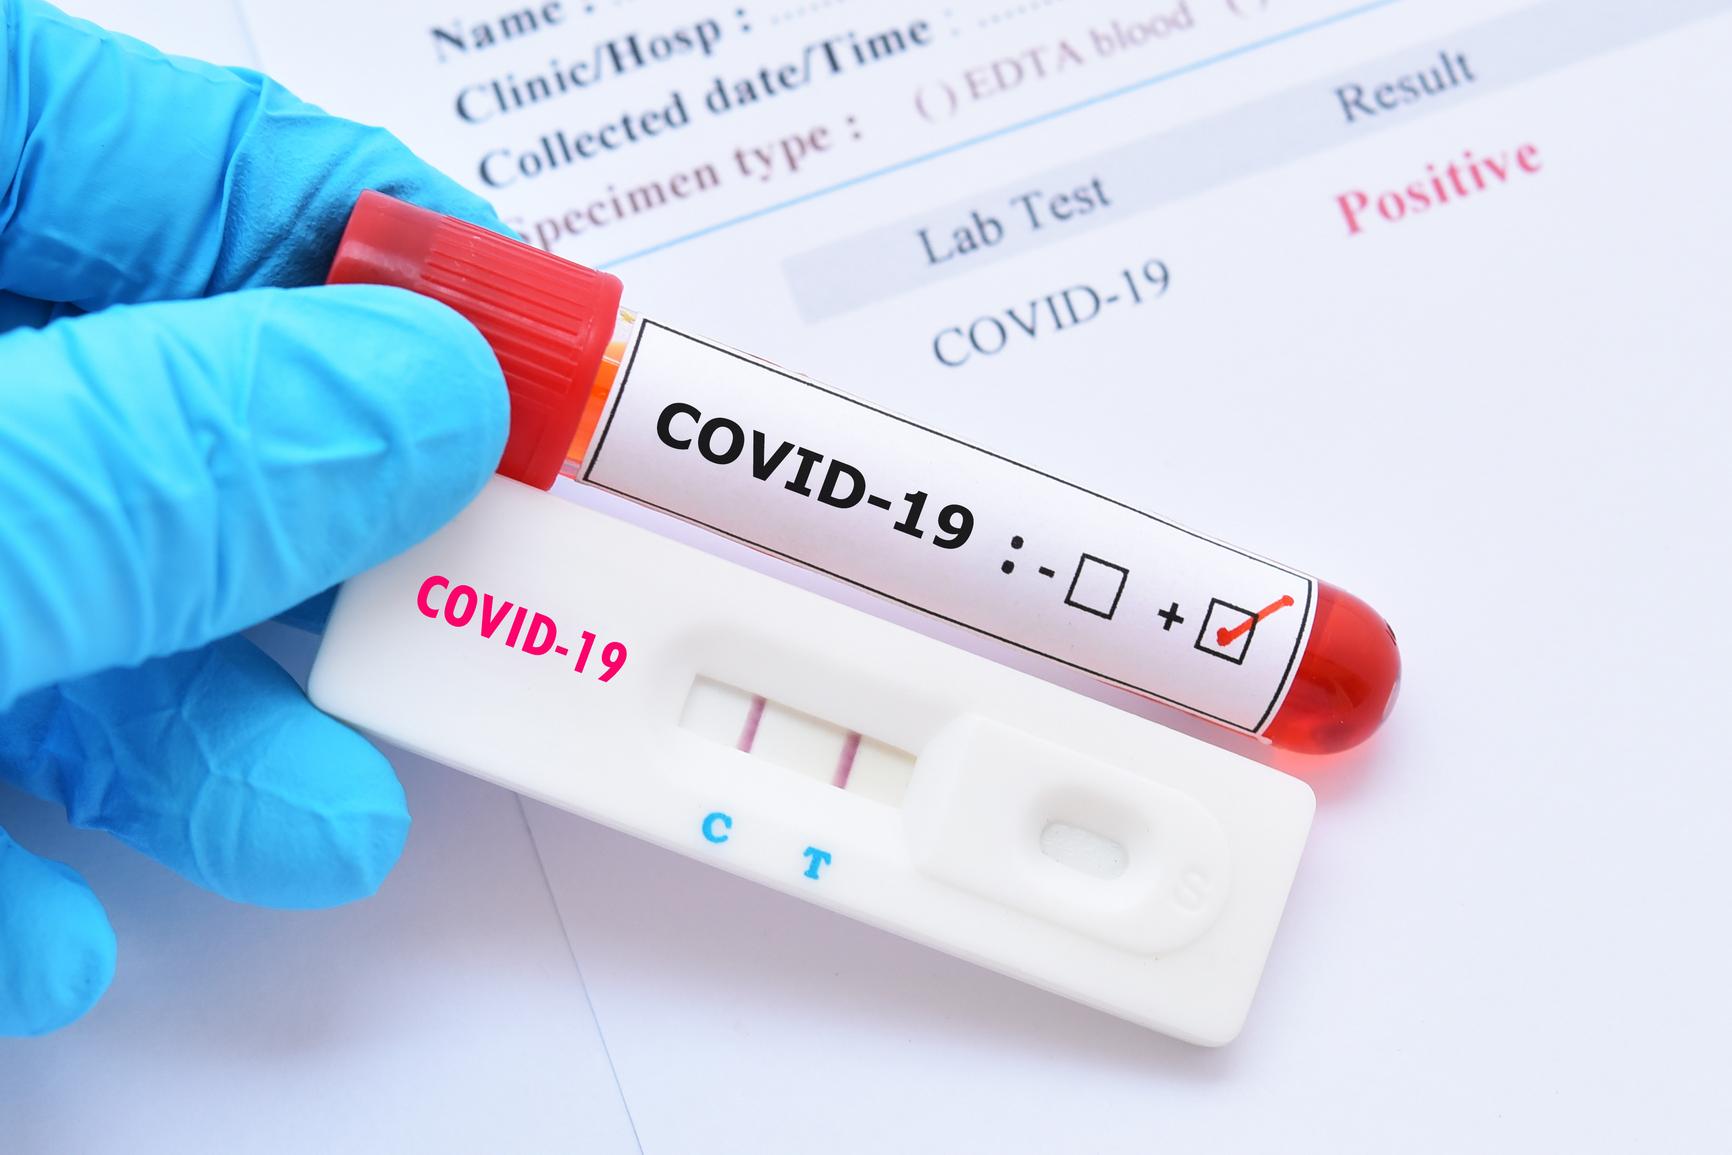 Swabs Antibodies Wait Times And More What Is The Covid 19 Test Actually Like Impacct Brooklyn